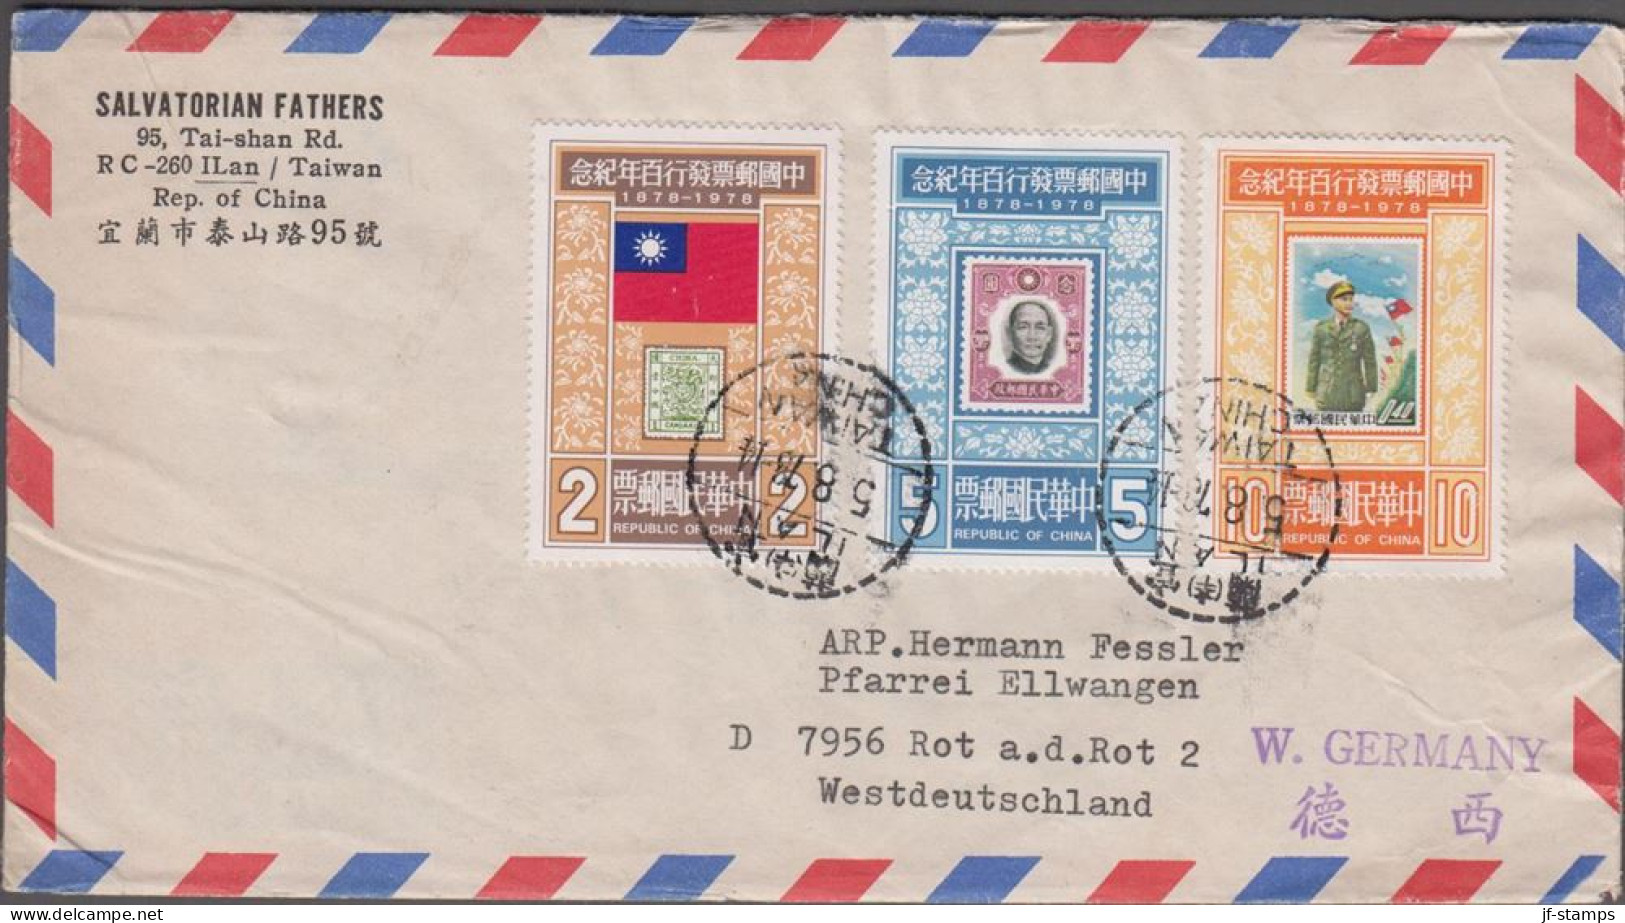 1978. TAIWAN. Complete Set 100 Years Stamps From China On Cover To Germany Cancelled TAIWAN 5 8 78. Sender... - JF524473 - Brieven En Documenten